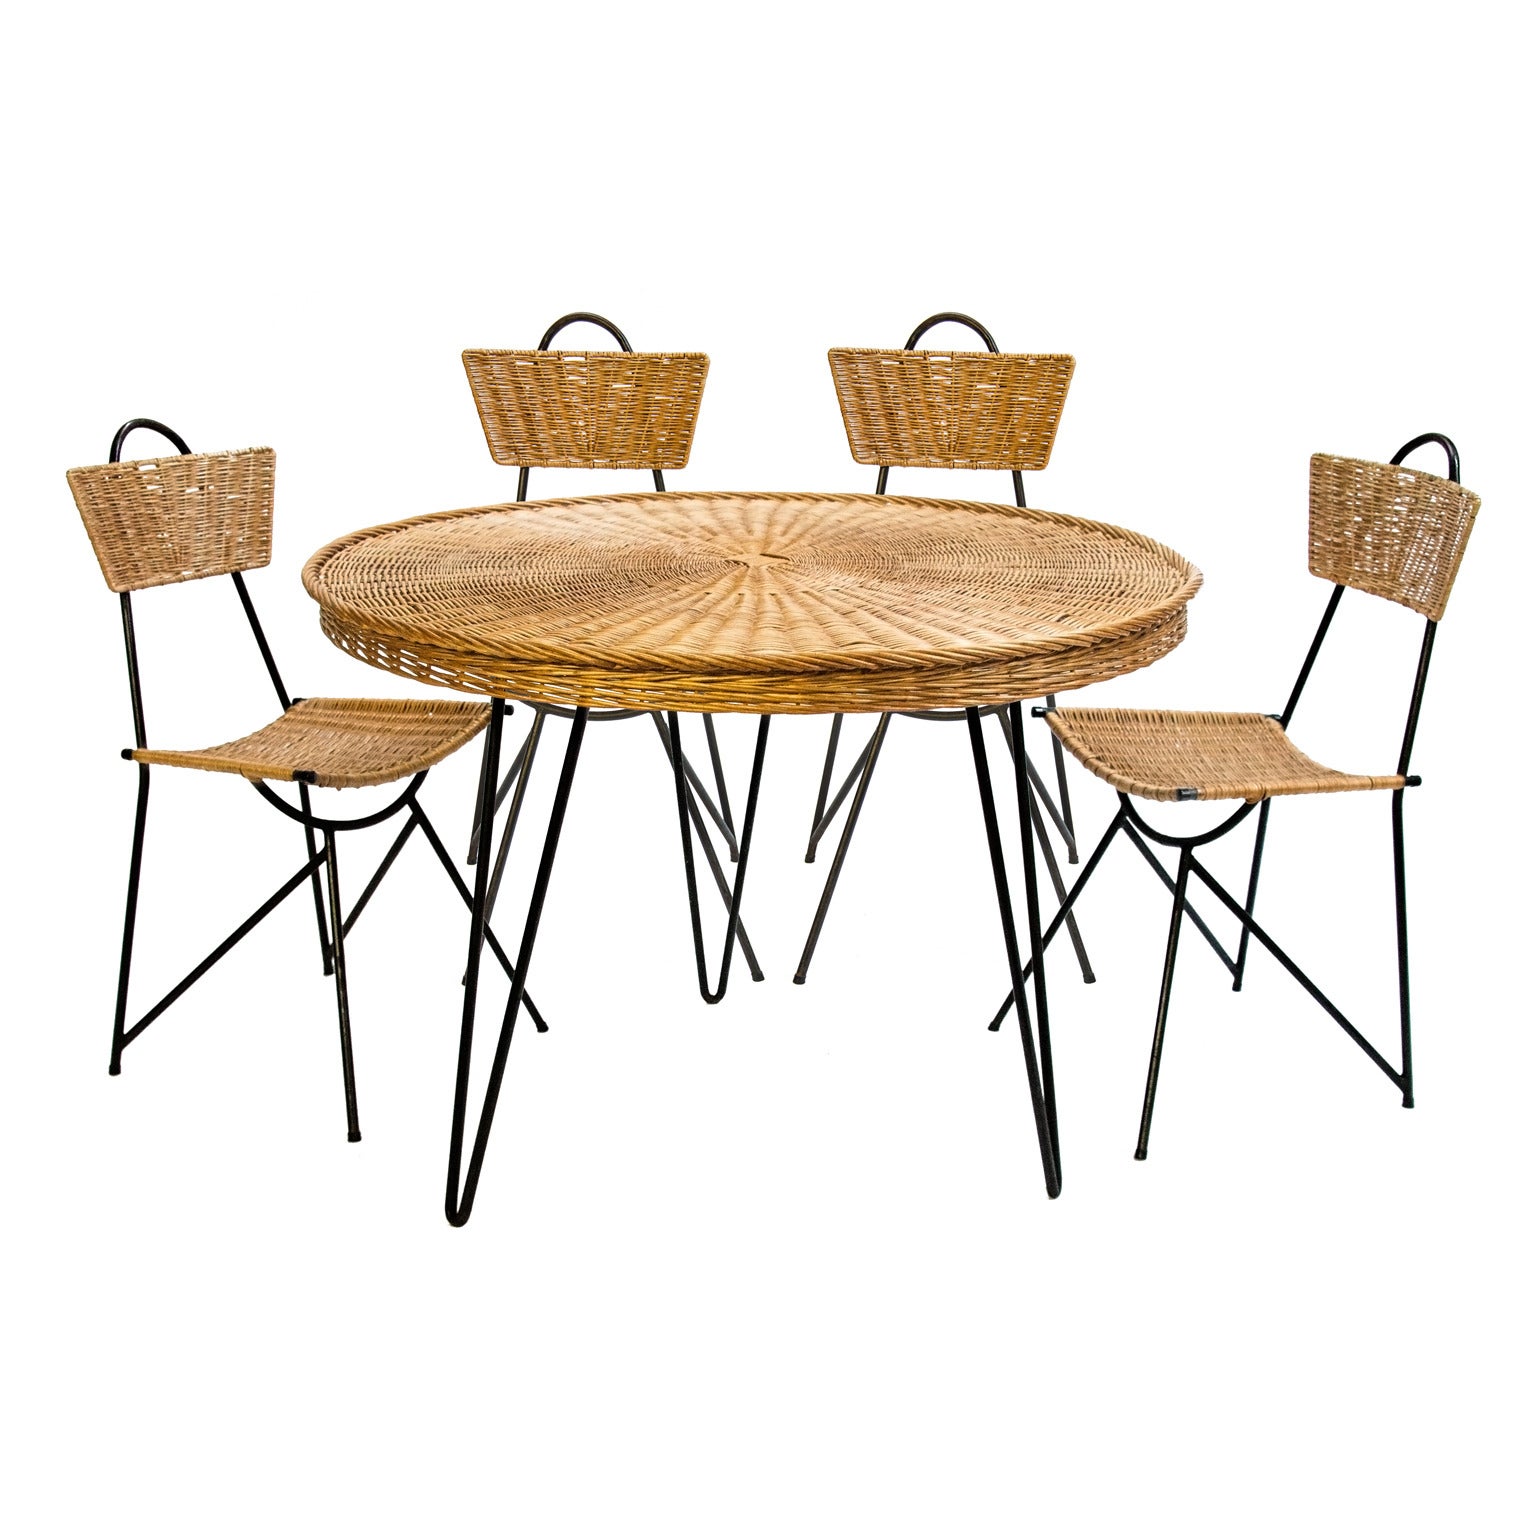 1950s Black Metal and Rattan Dining Set in the style of Franco Albini